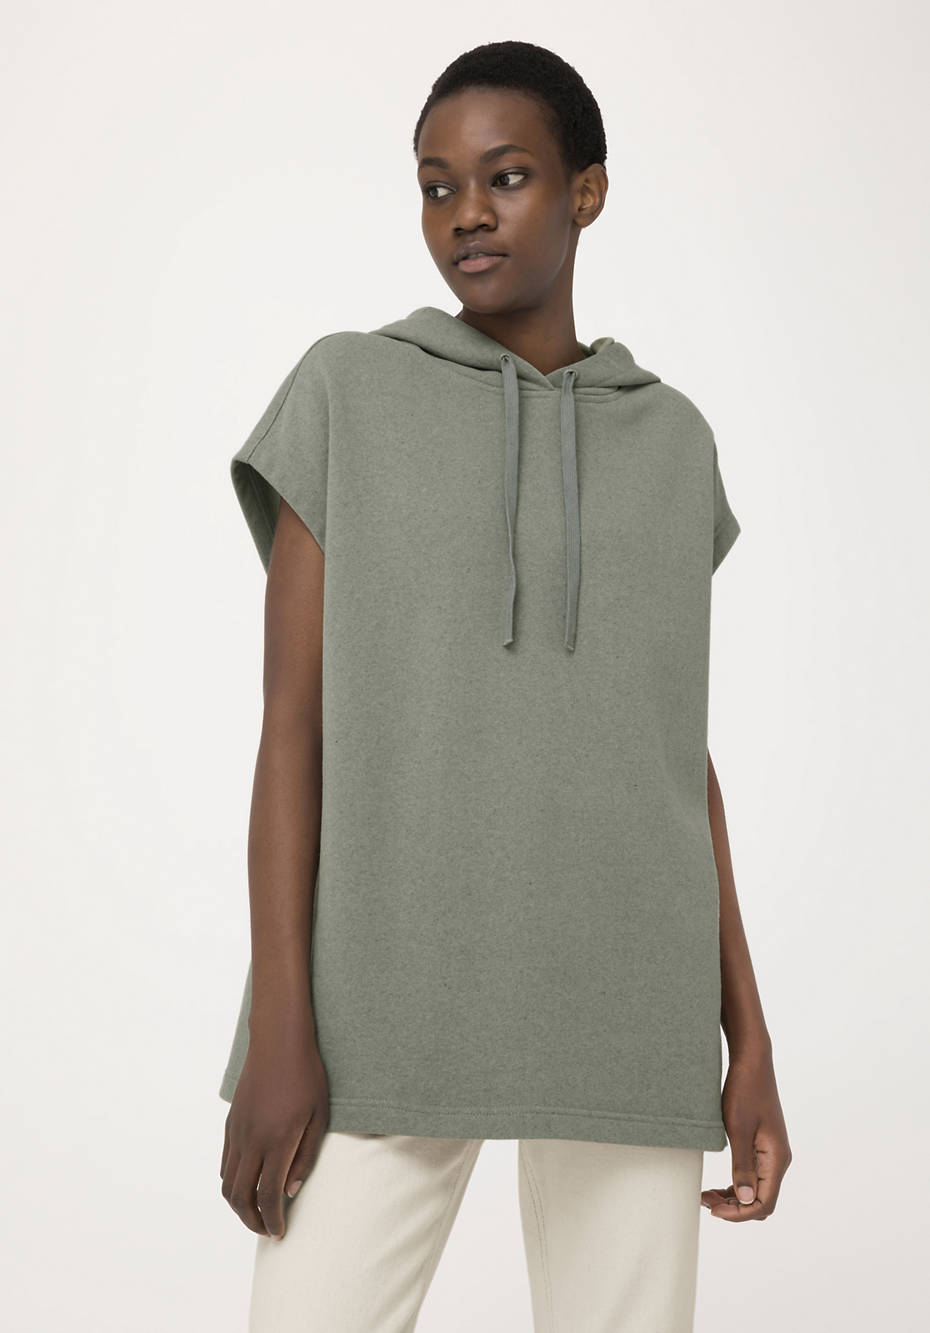 Hooded shirt made from pure organic cotton